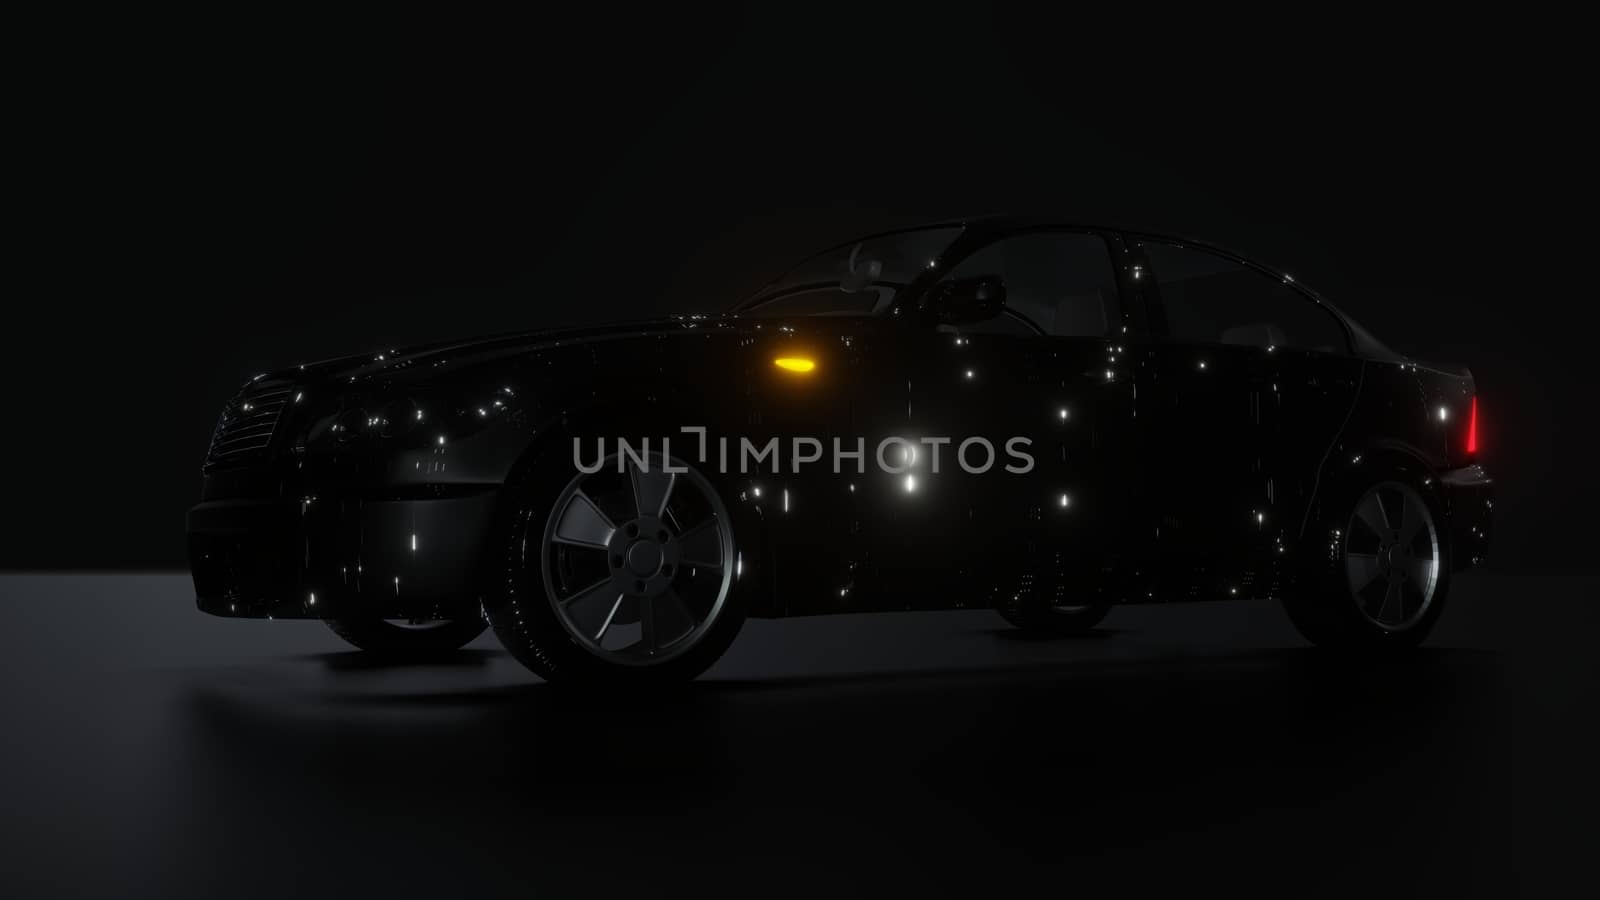 Black Brandless Car on Dark Background. 3D illustration. Futuristic car paint with bright luminous chaotic patterns